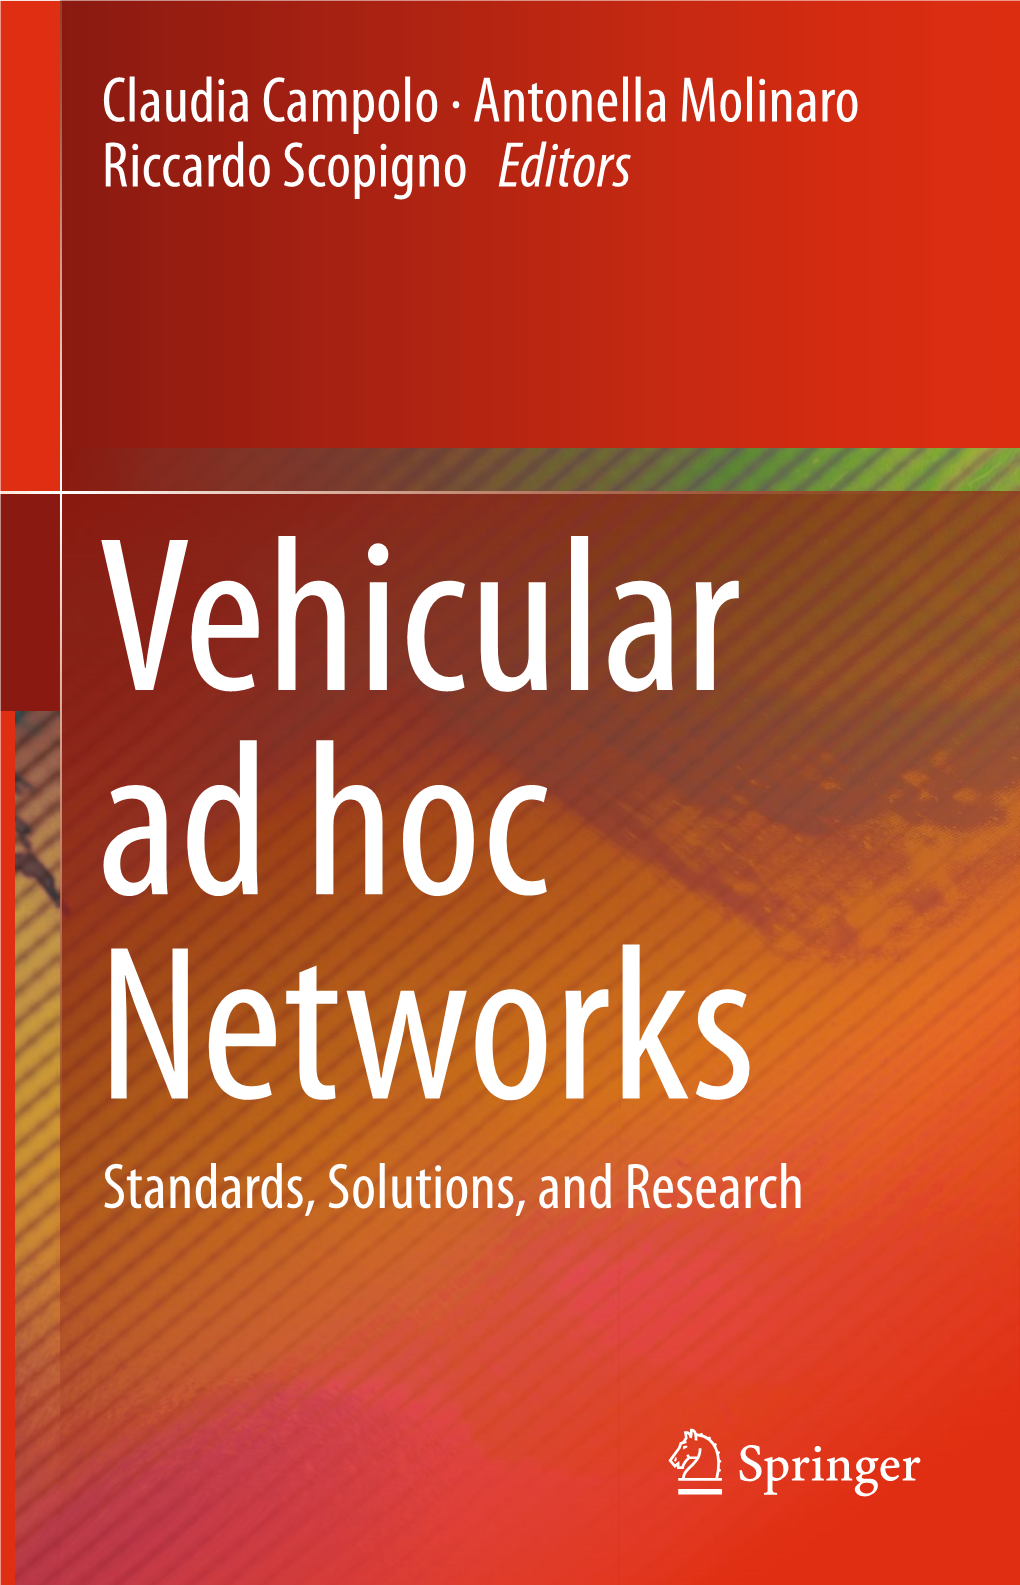 Vehicular Ad Hoc Networks Standards, Solutions, and Research Vehicular Ad Hoc Networks